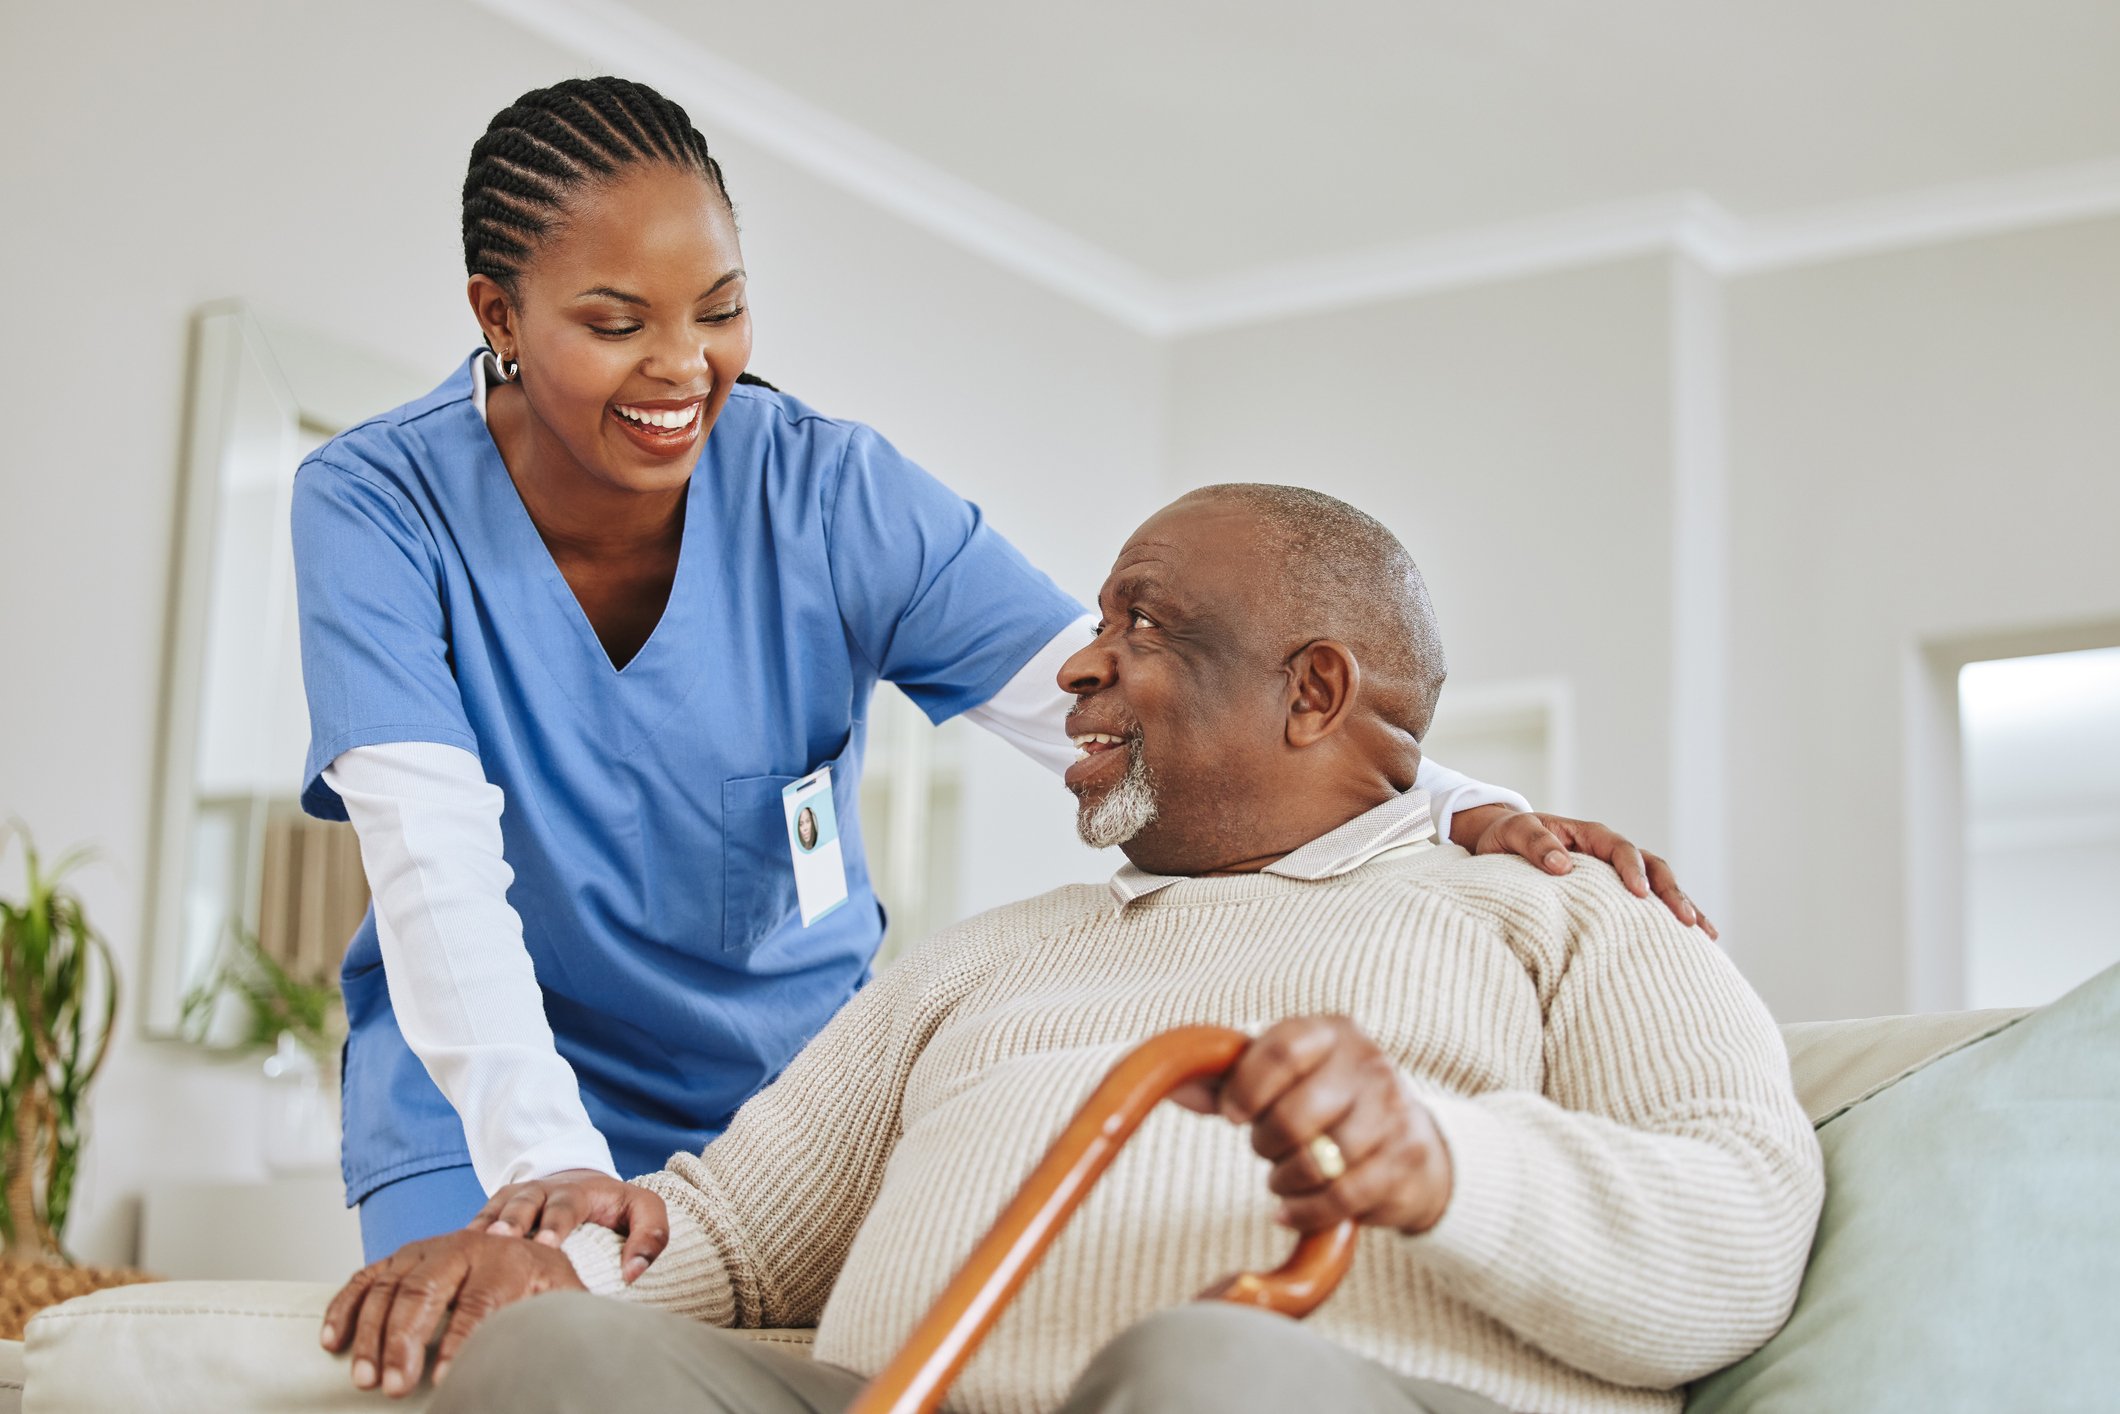 home benefits surge in popularity among medicare advantage plans